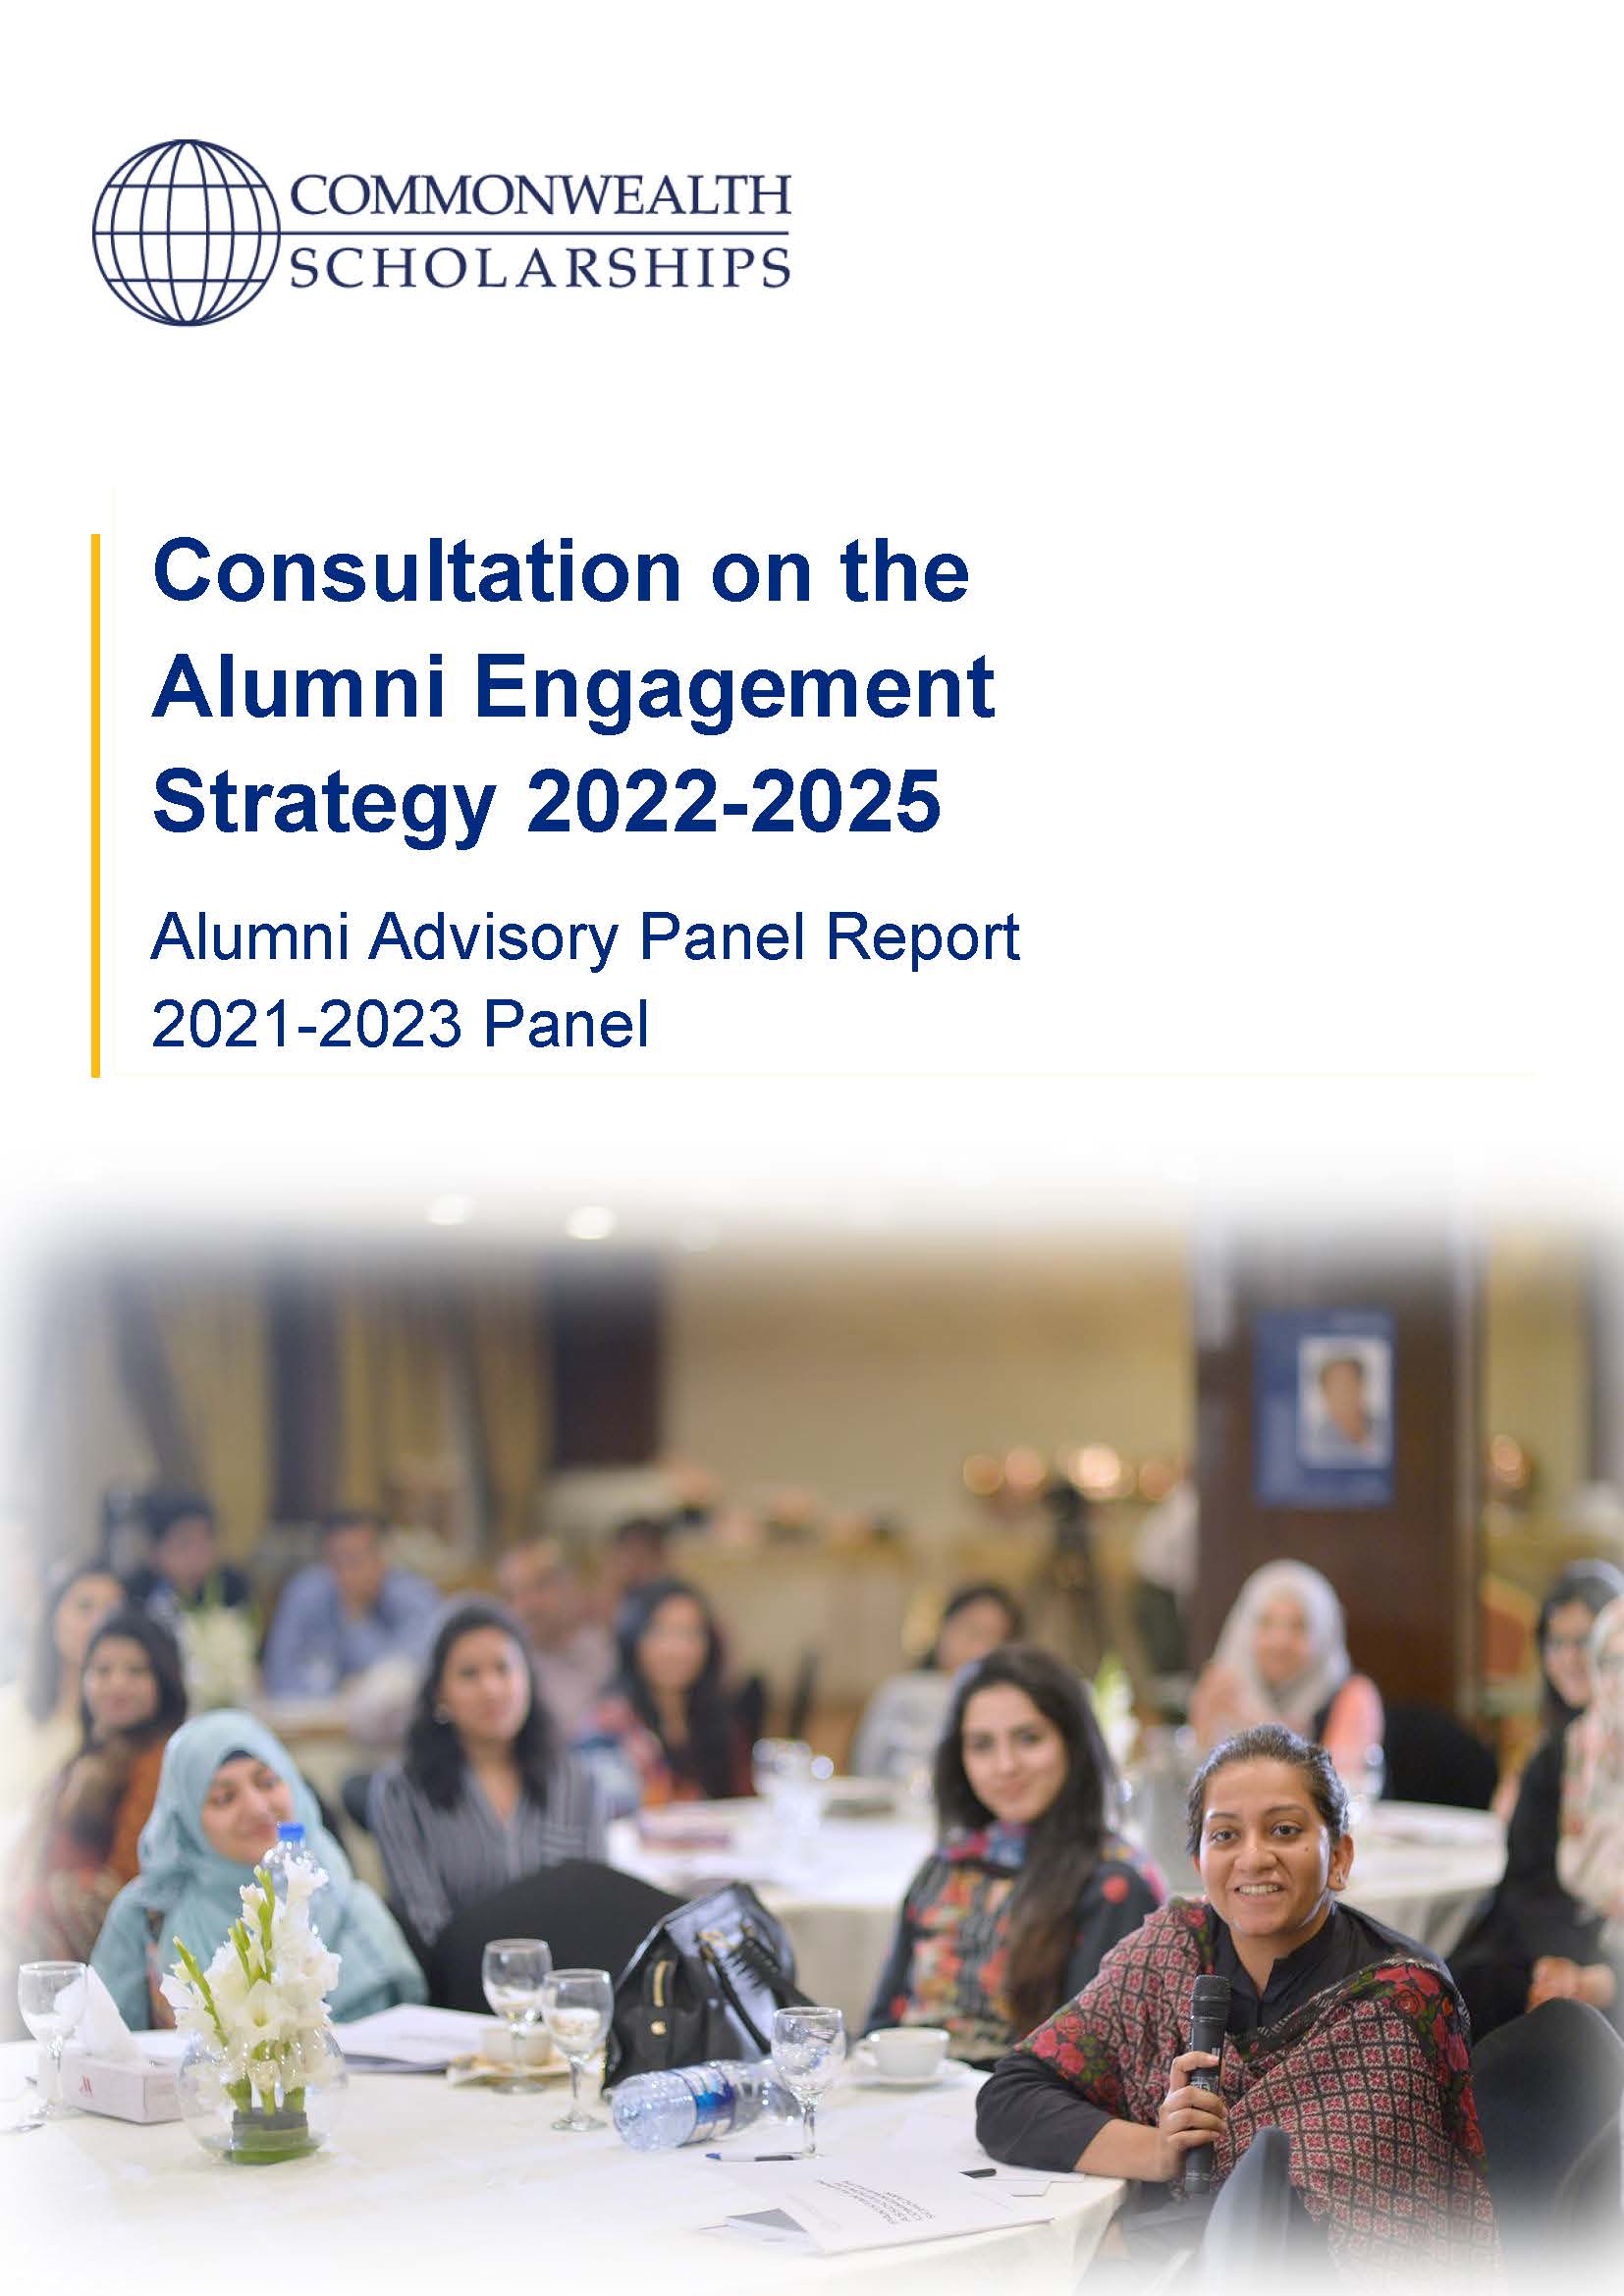 Consultation on the Alumni Engagement Strategy 2022-2025